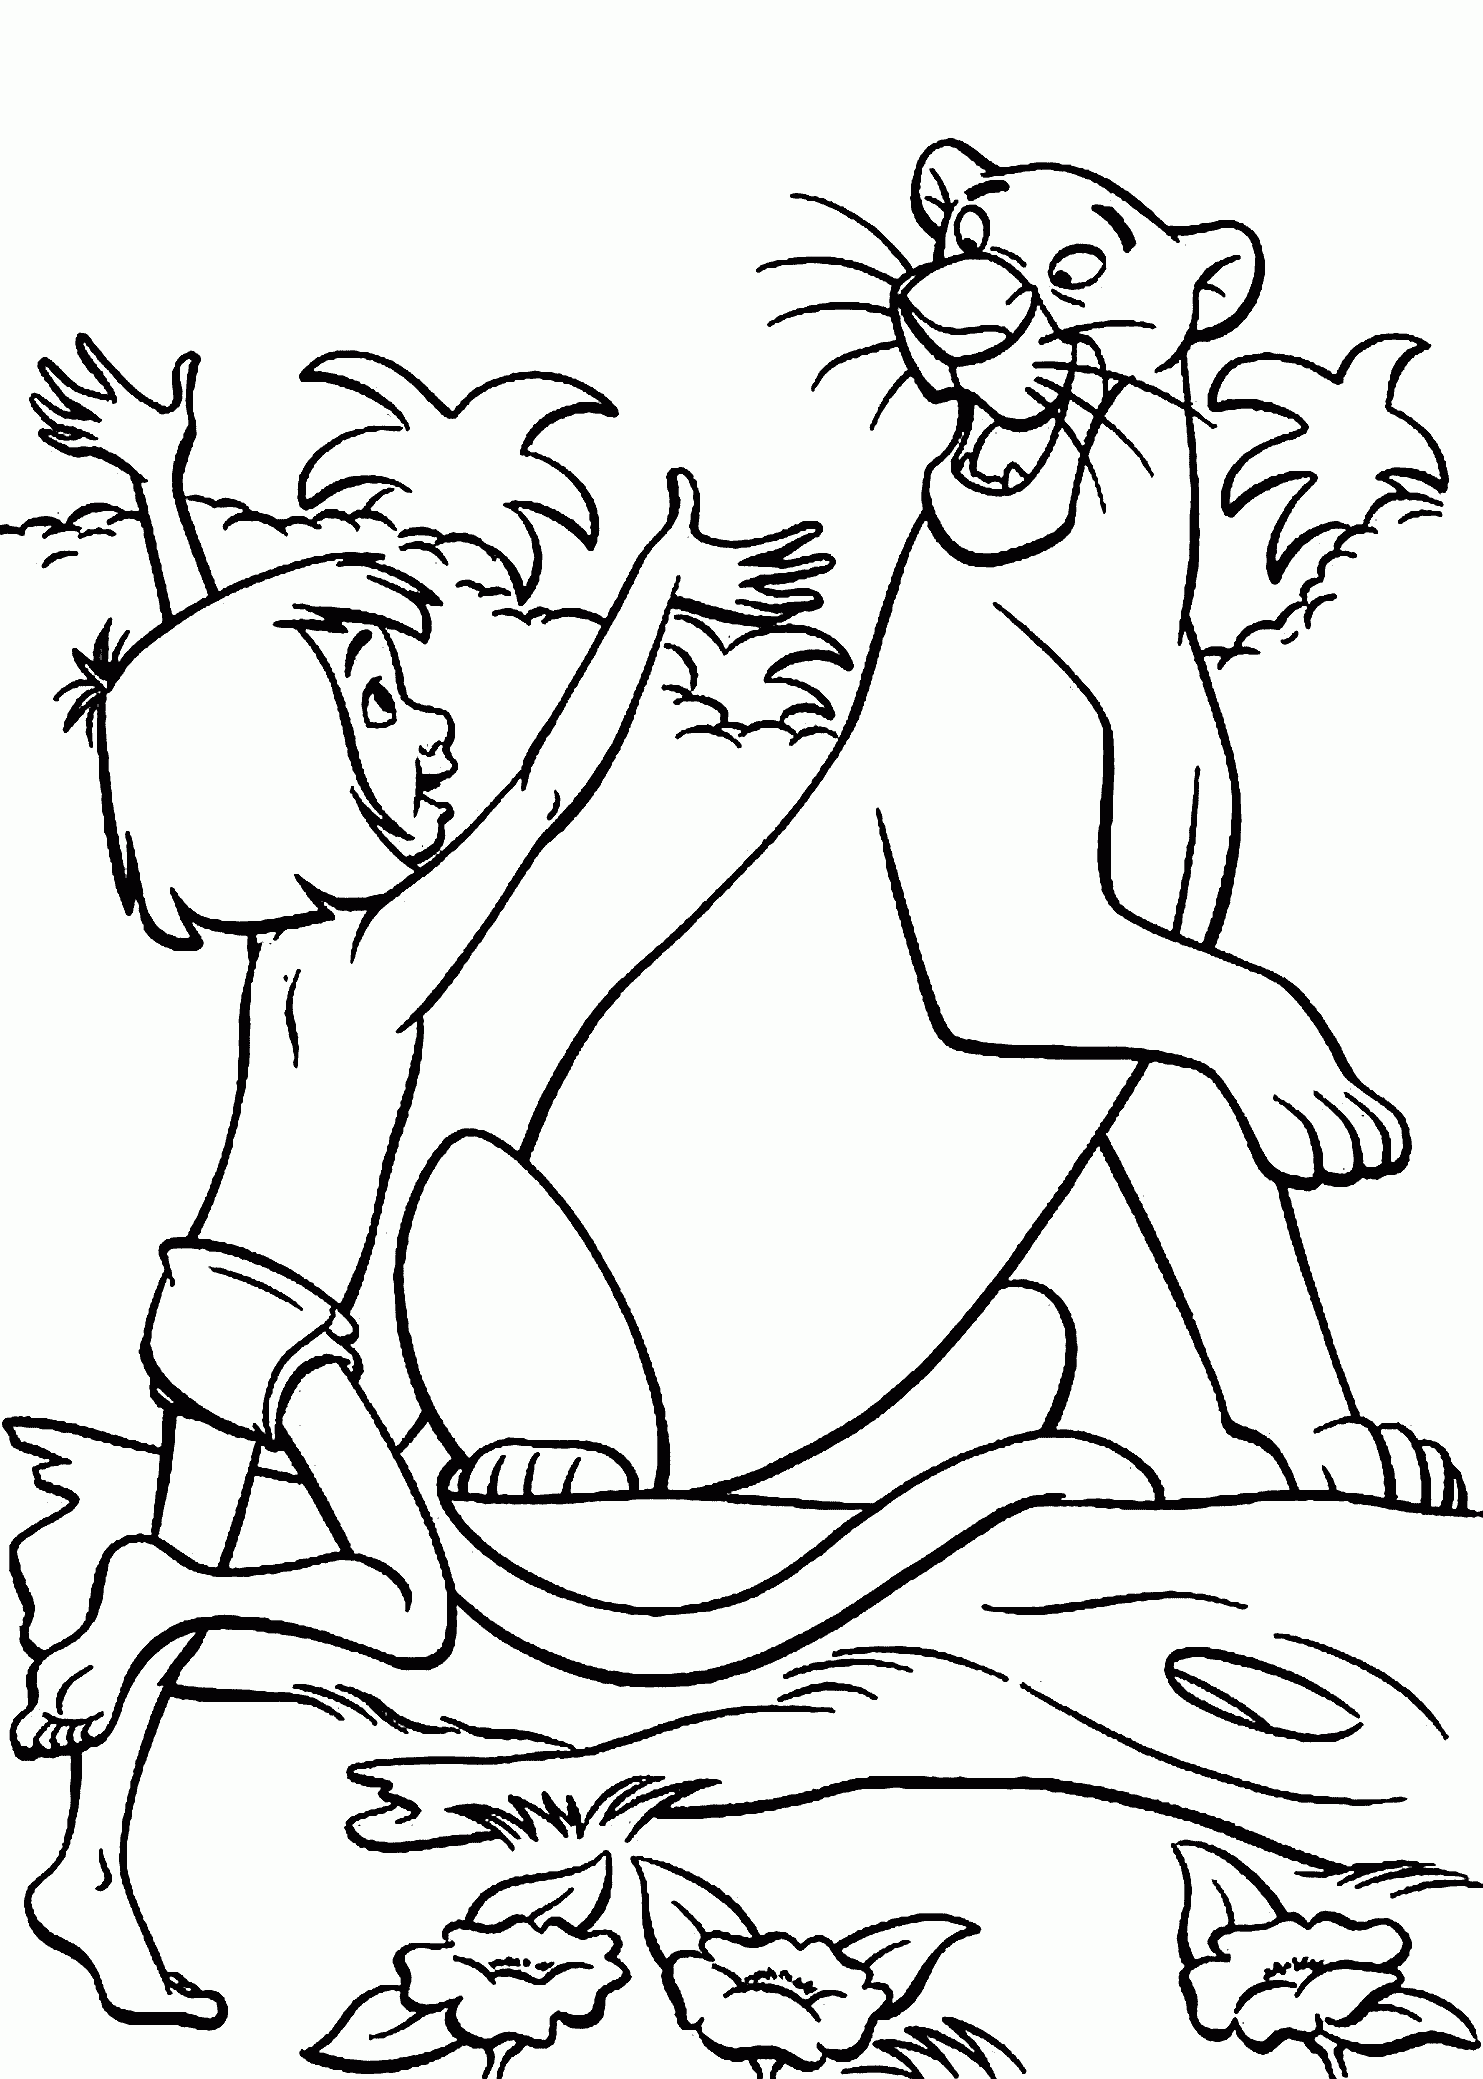 Download Coloring Pages Of Jungle Book - Coloring Home